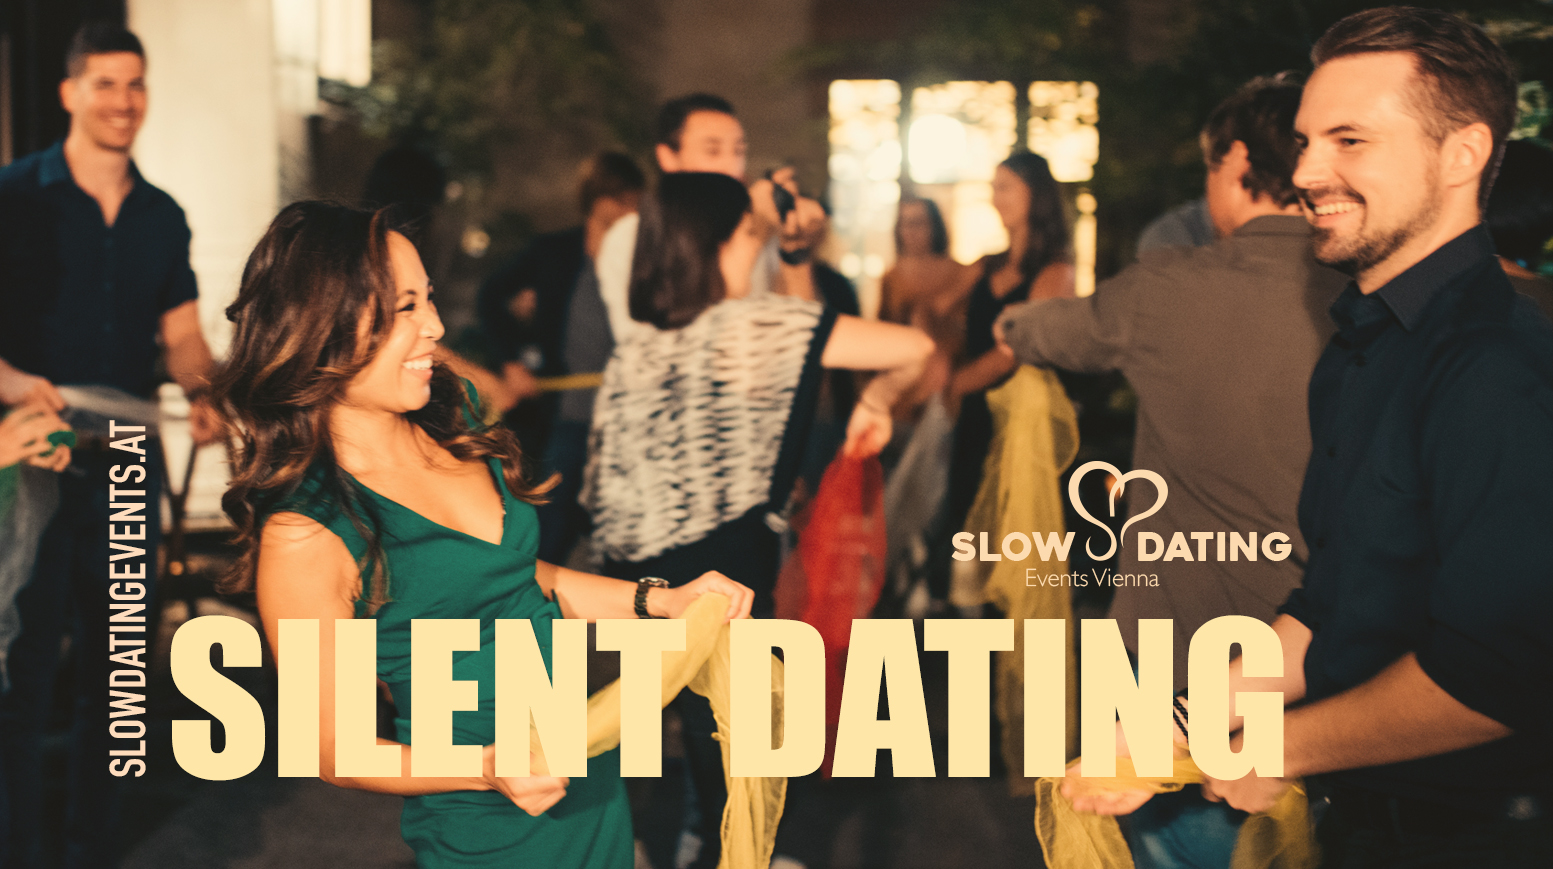 Silent dating